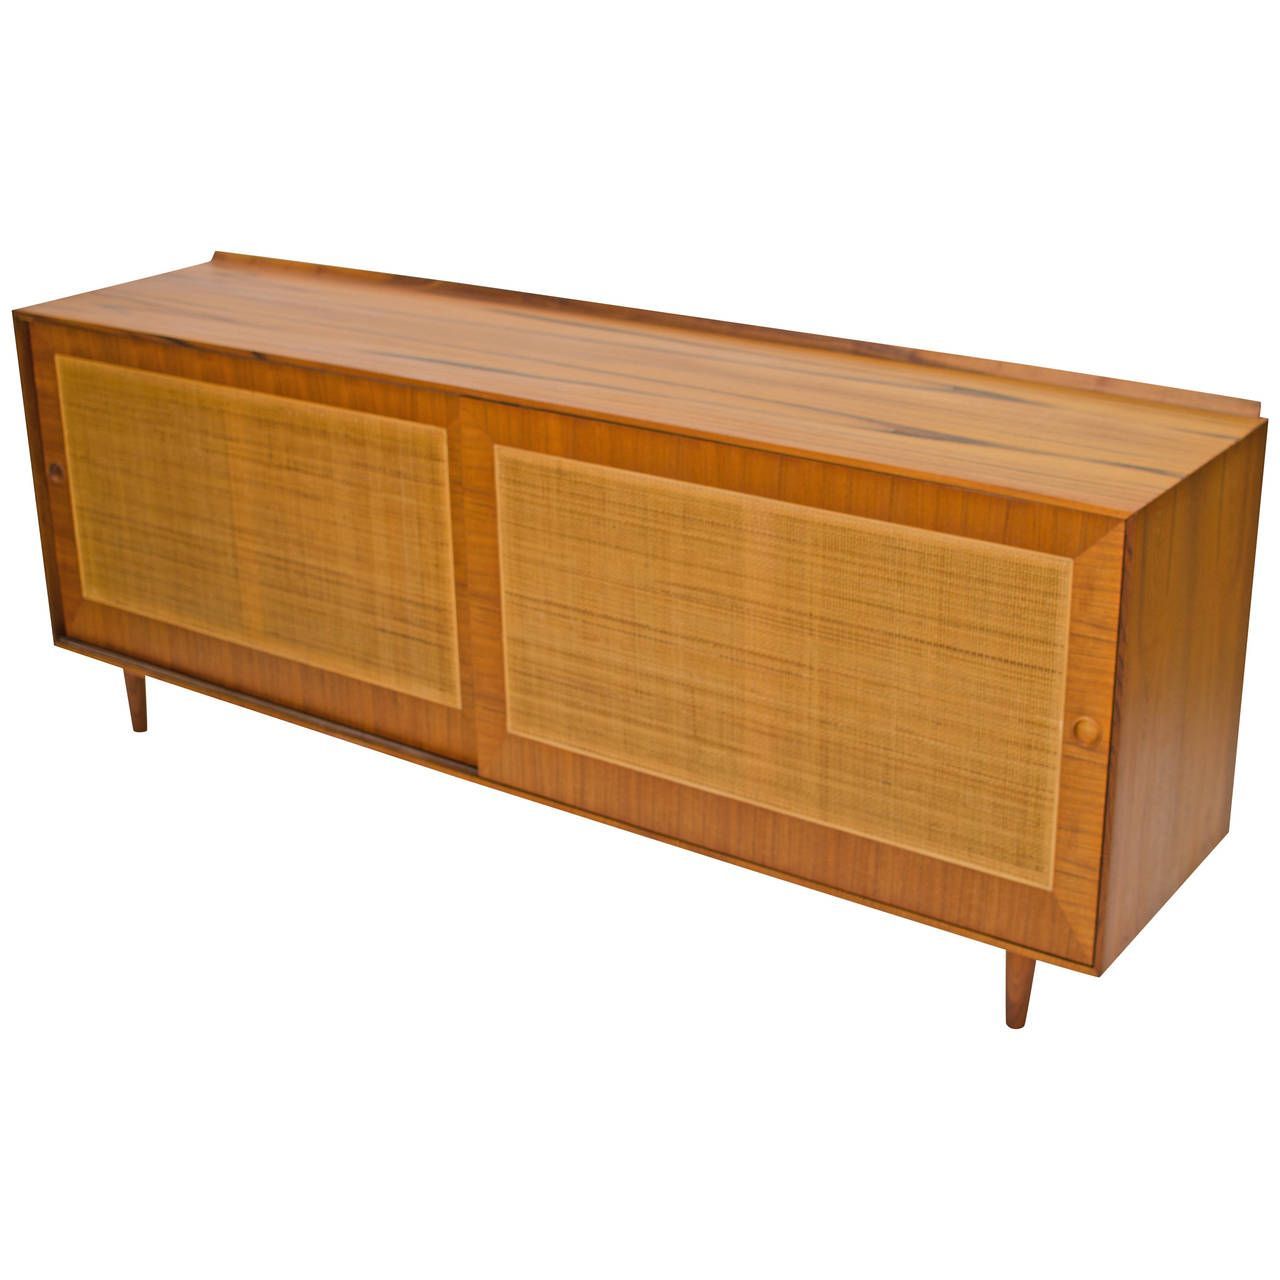 Finn Juhl Designed Sideboard, Circa 1952 | Modern Cane With Womack Sideboards (View 11 of 30)